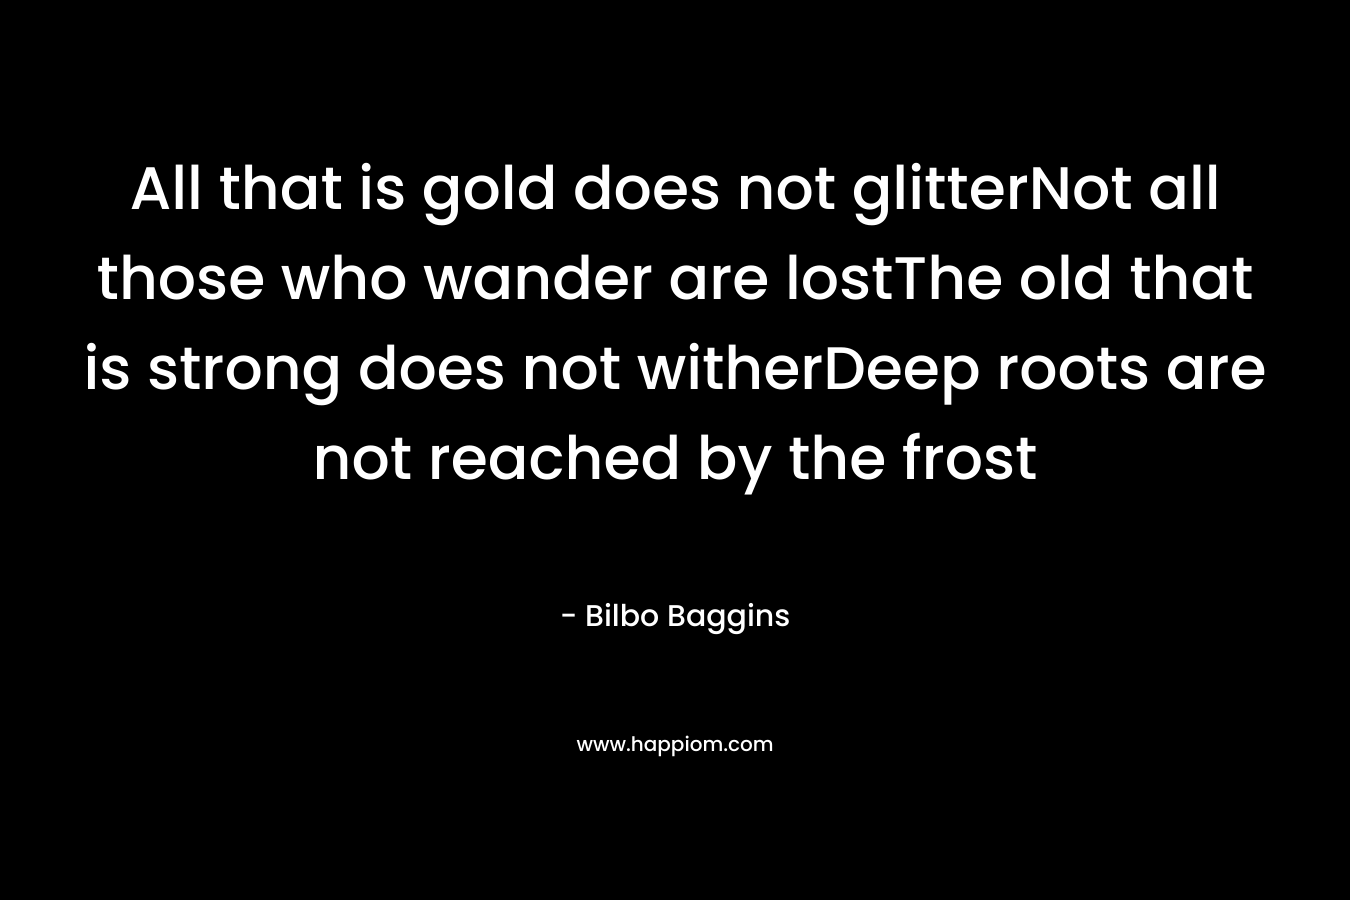 All that is gold does not glitterNot all those who wander are lostThe old that is strong does not witherDeep roots are not reached by the frost – Bilbo Baggins